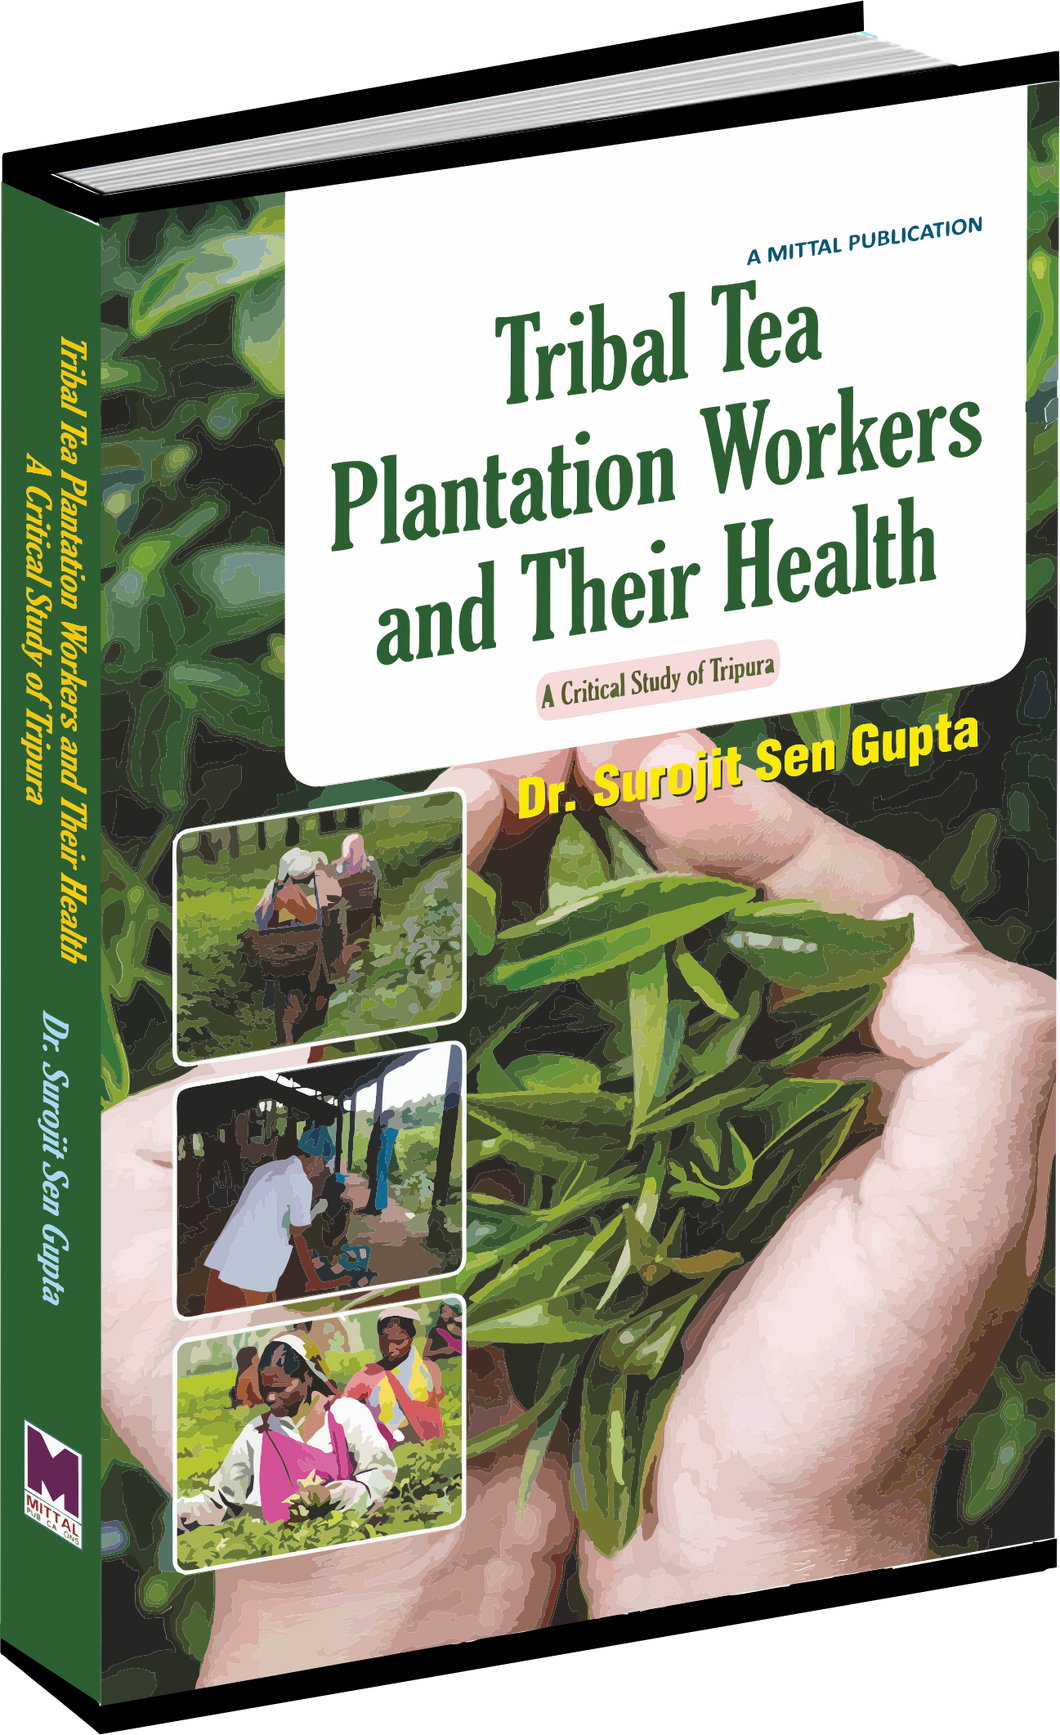 TRIBAL TEA PLANTATION WORKERS AND THEIR HEALTH by Dr. Surojit Sen Gupta